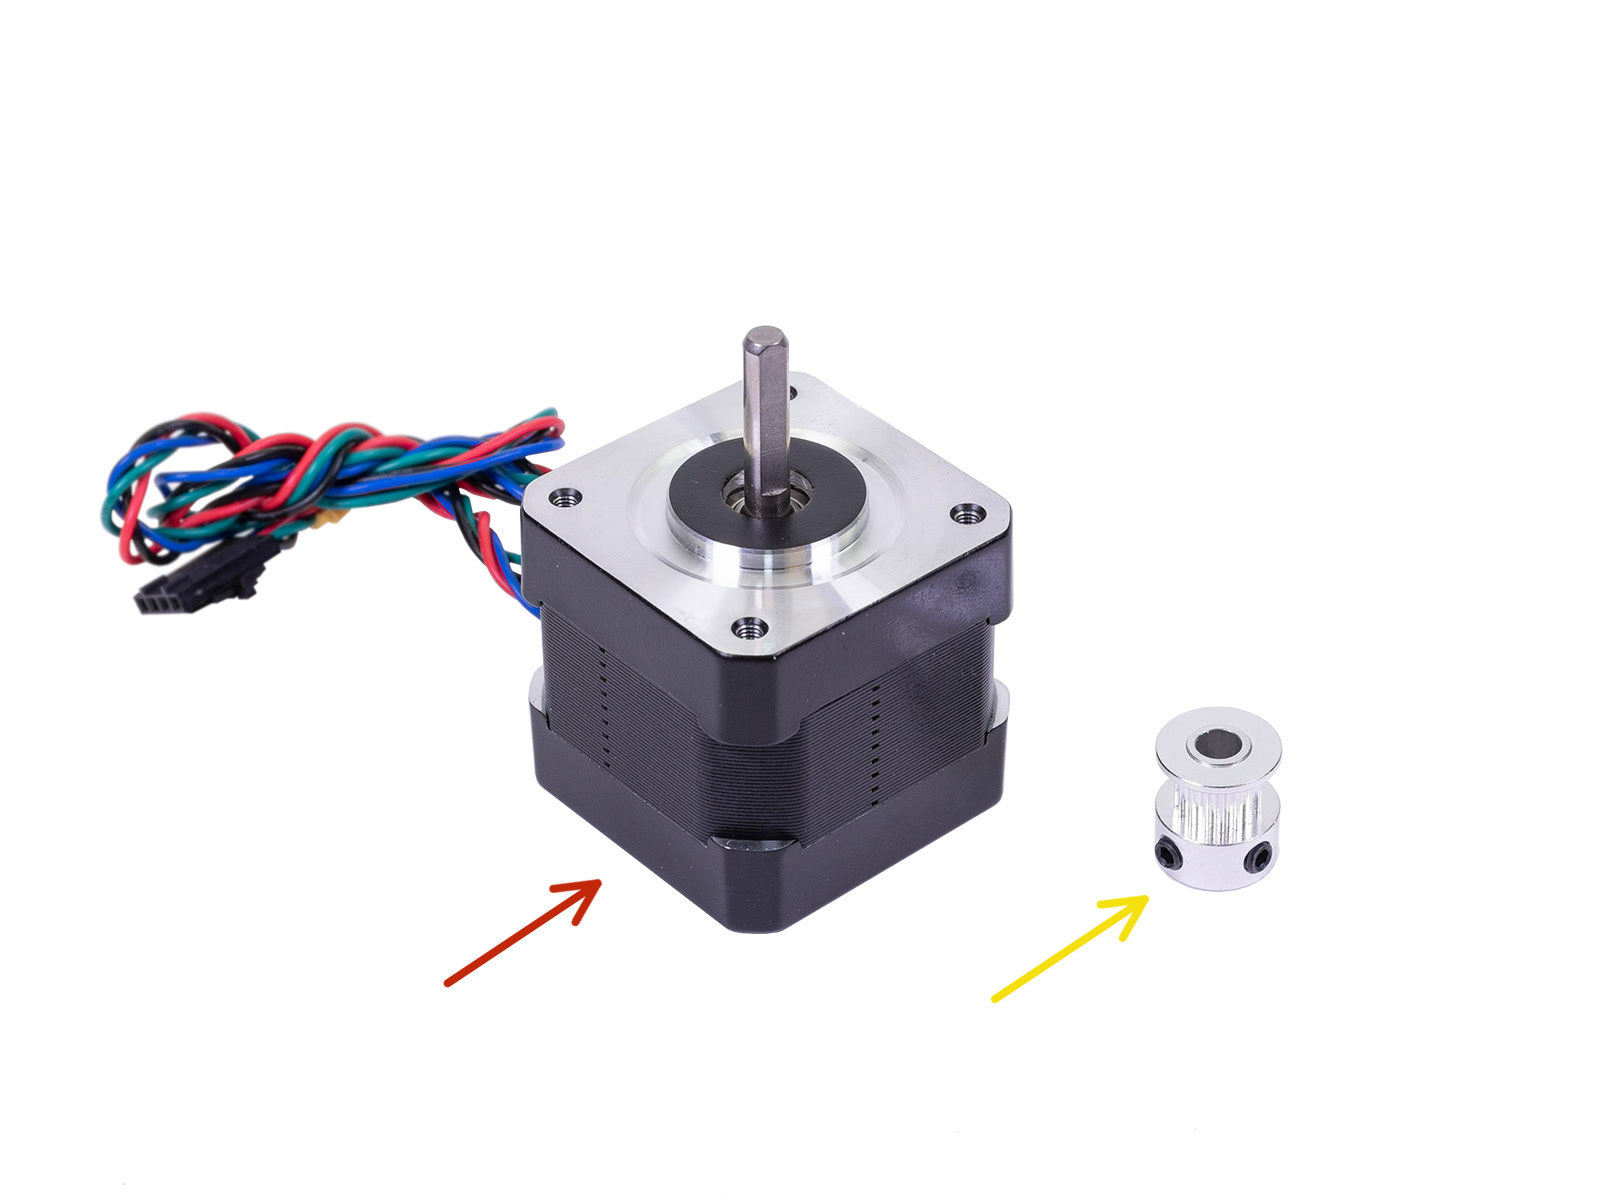 Assembling the X-axis motor pulley (part 1)